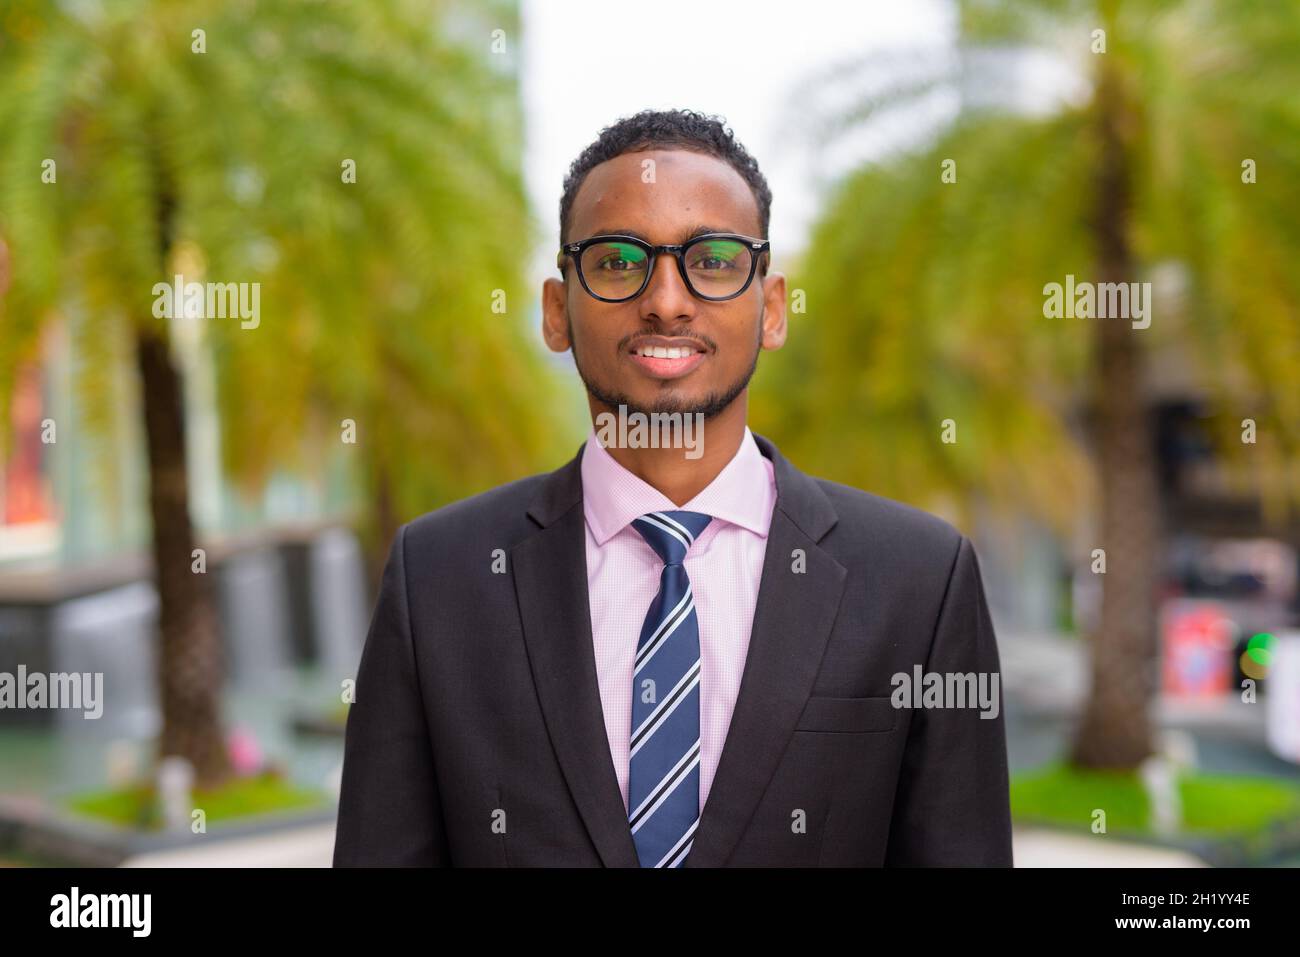 Portrait of professional young African businessman Stock Photo